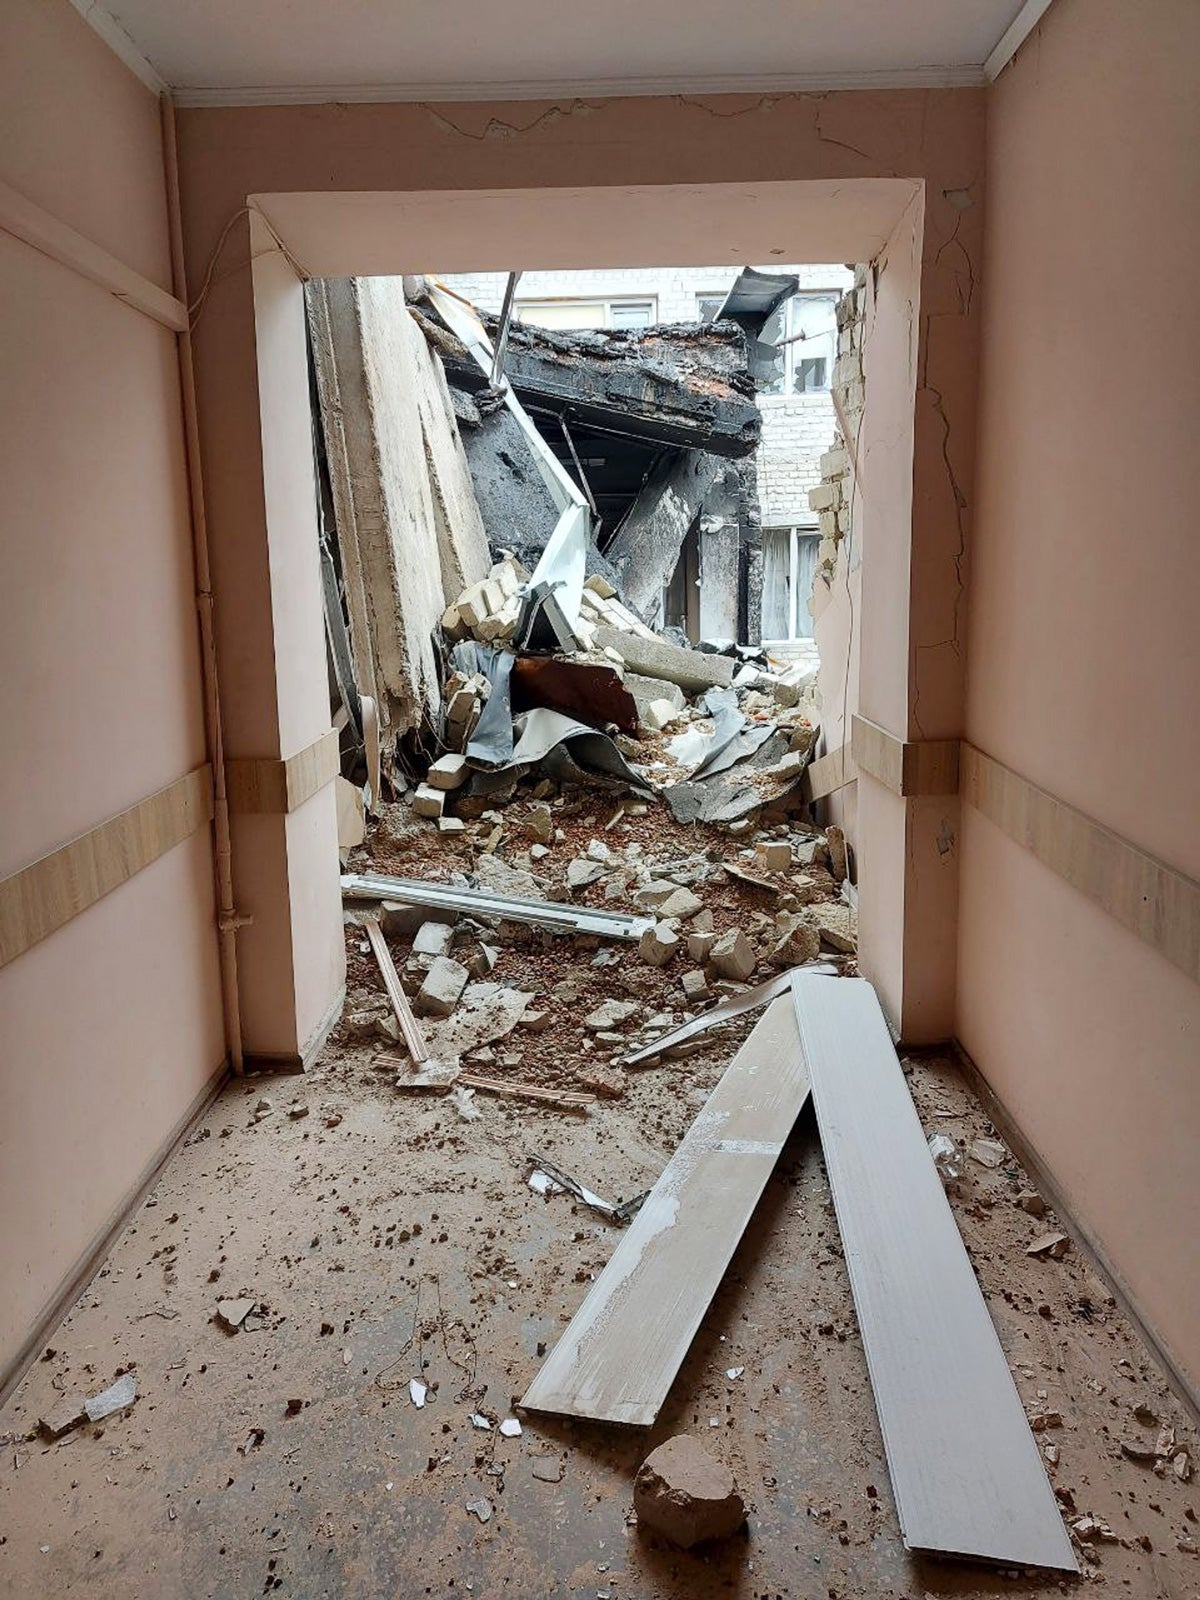 A light pink hospital hallway leads to mass destruction: fallen walls, no ceiling, debris and dirt on the floor. Two panels line flat on the floor in the hallway.